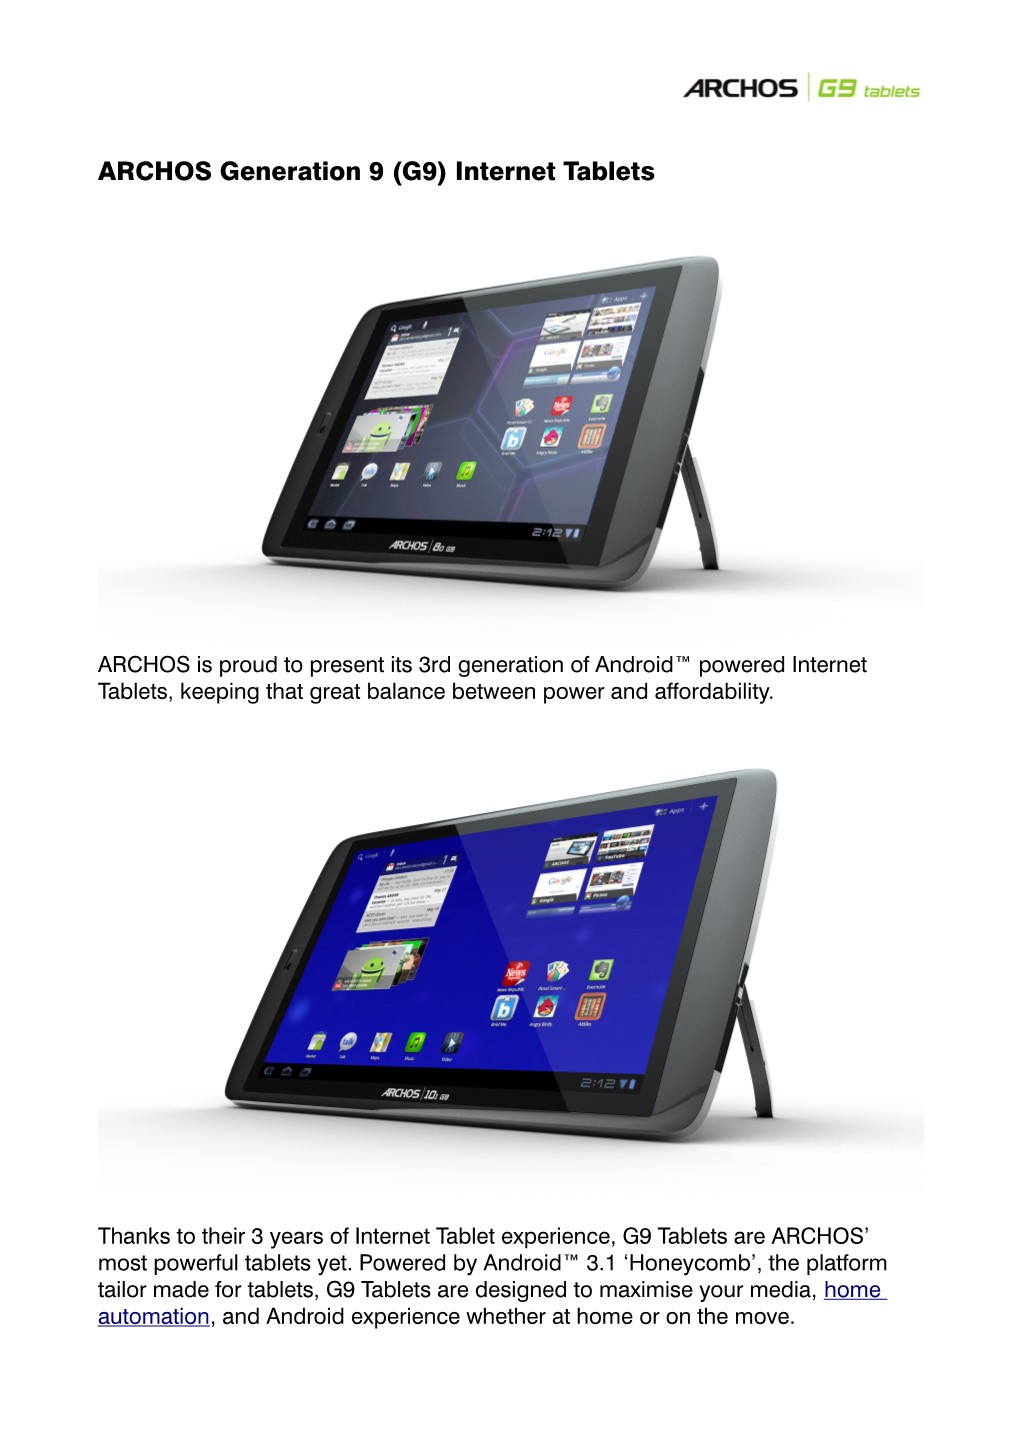 ARCHOS G9 Tablets - Ahead of the Rest